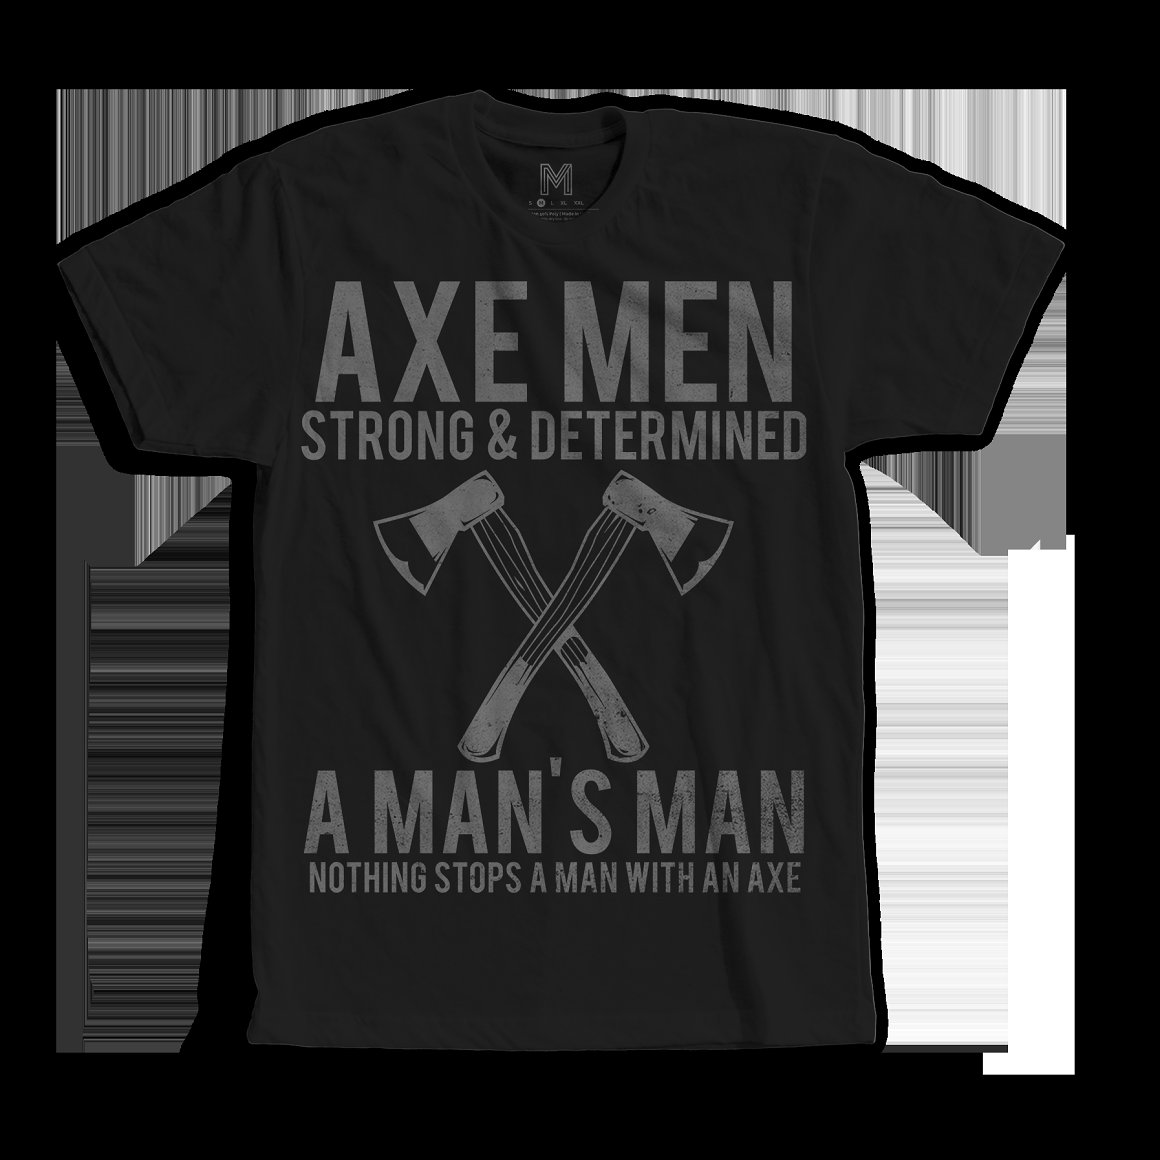 Black T-shirt with white vintage ax print and lettering.